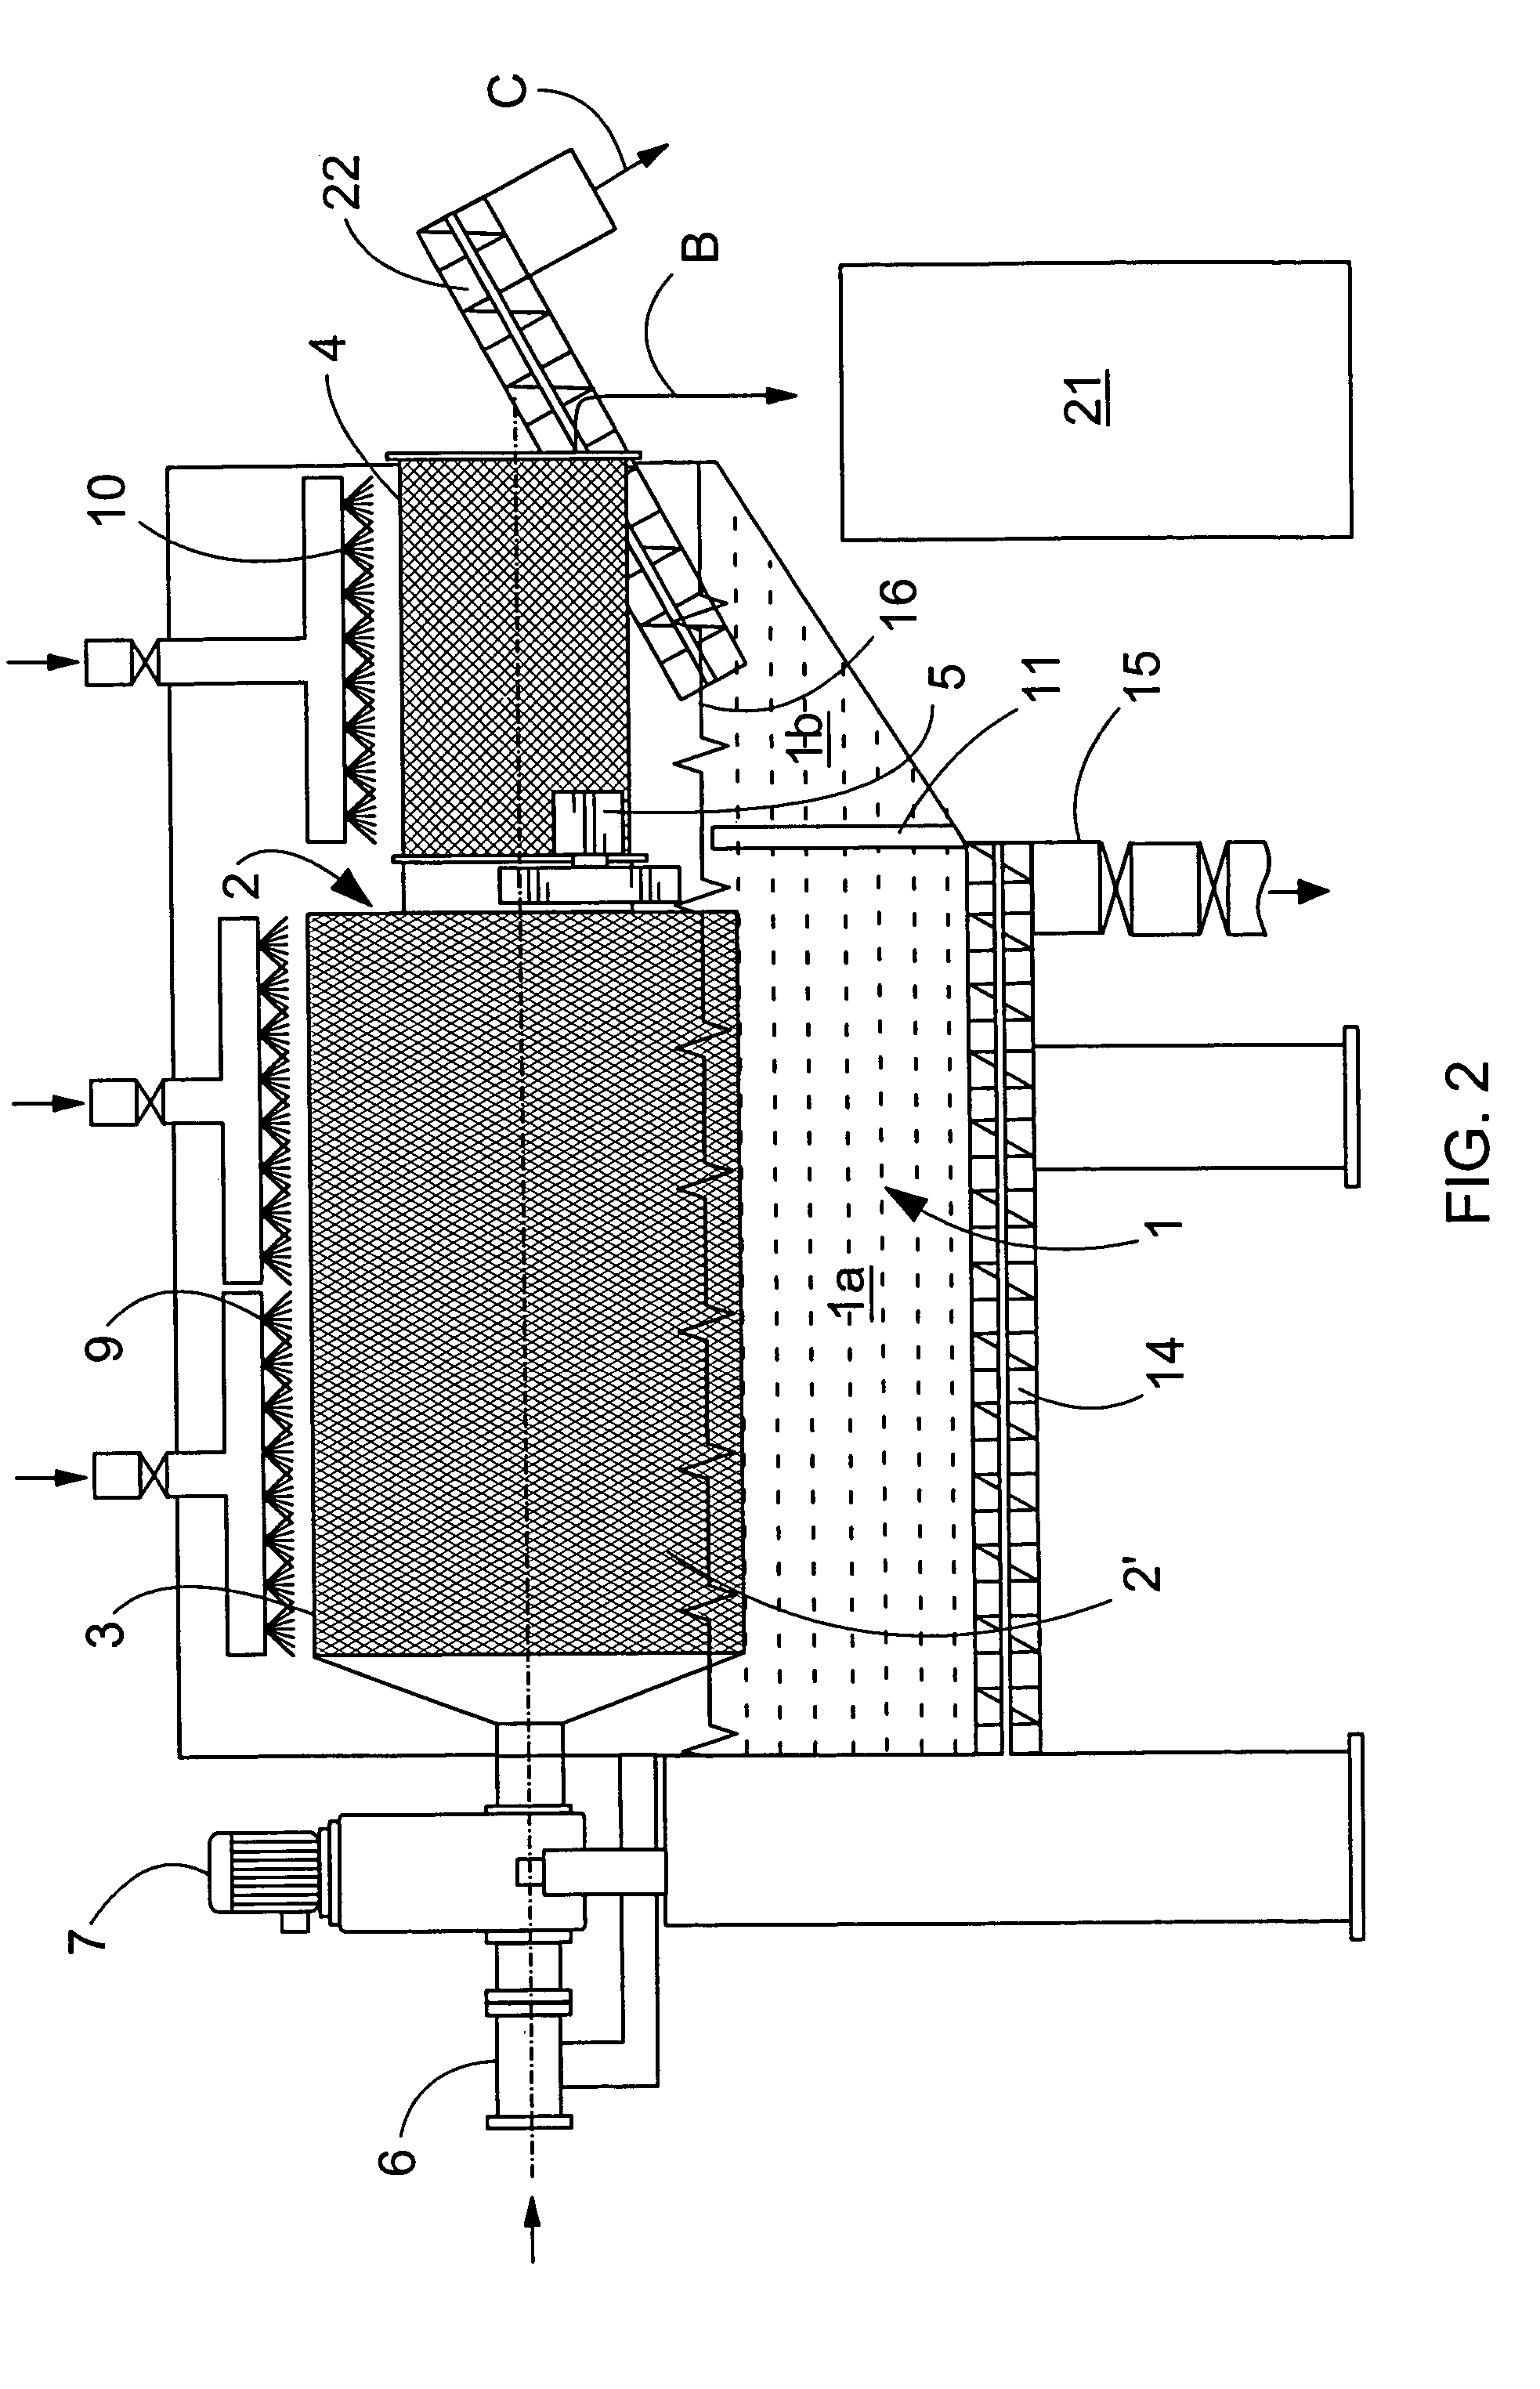 Apparatus for separating fibers from reject material